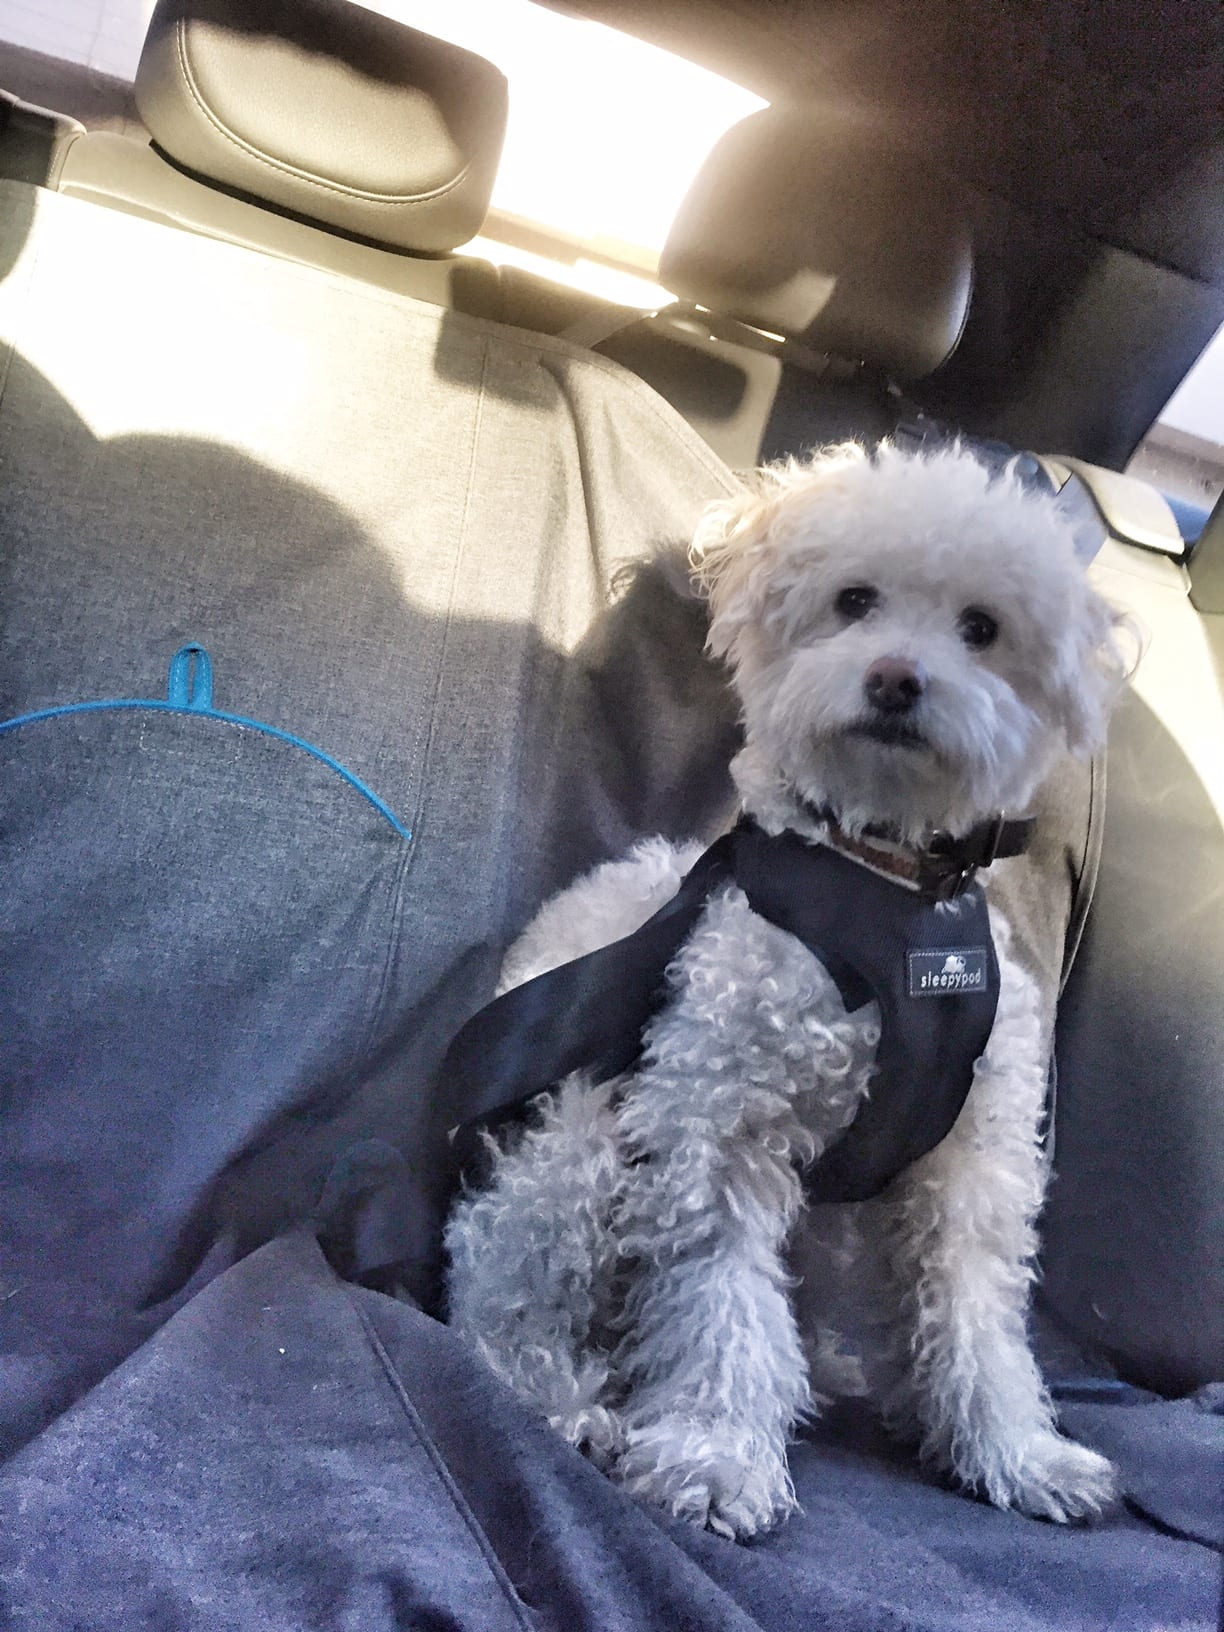 How safe is your dog’s car harness?